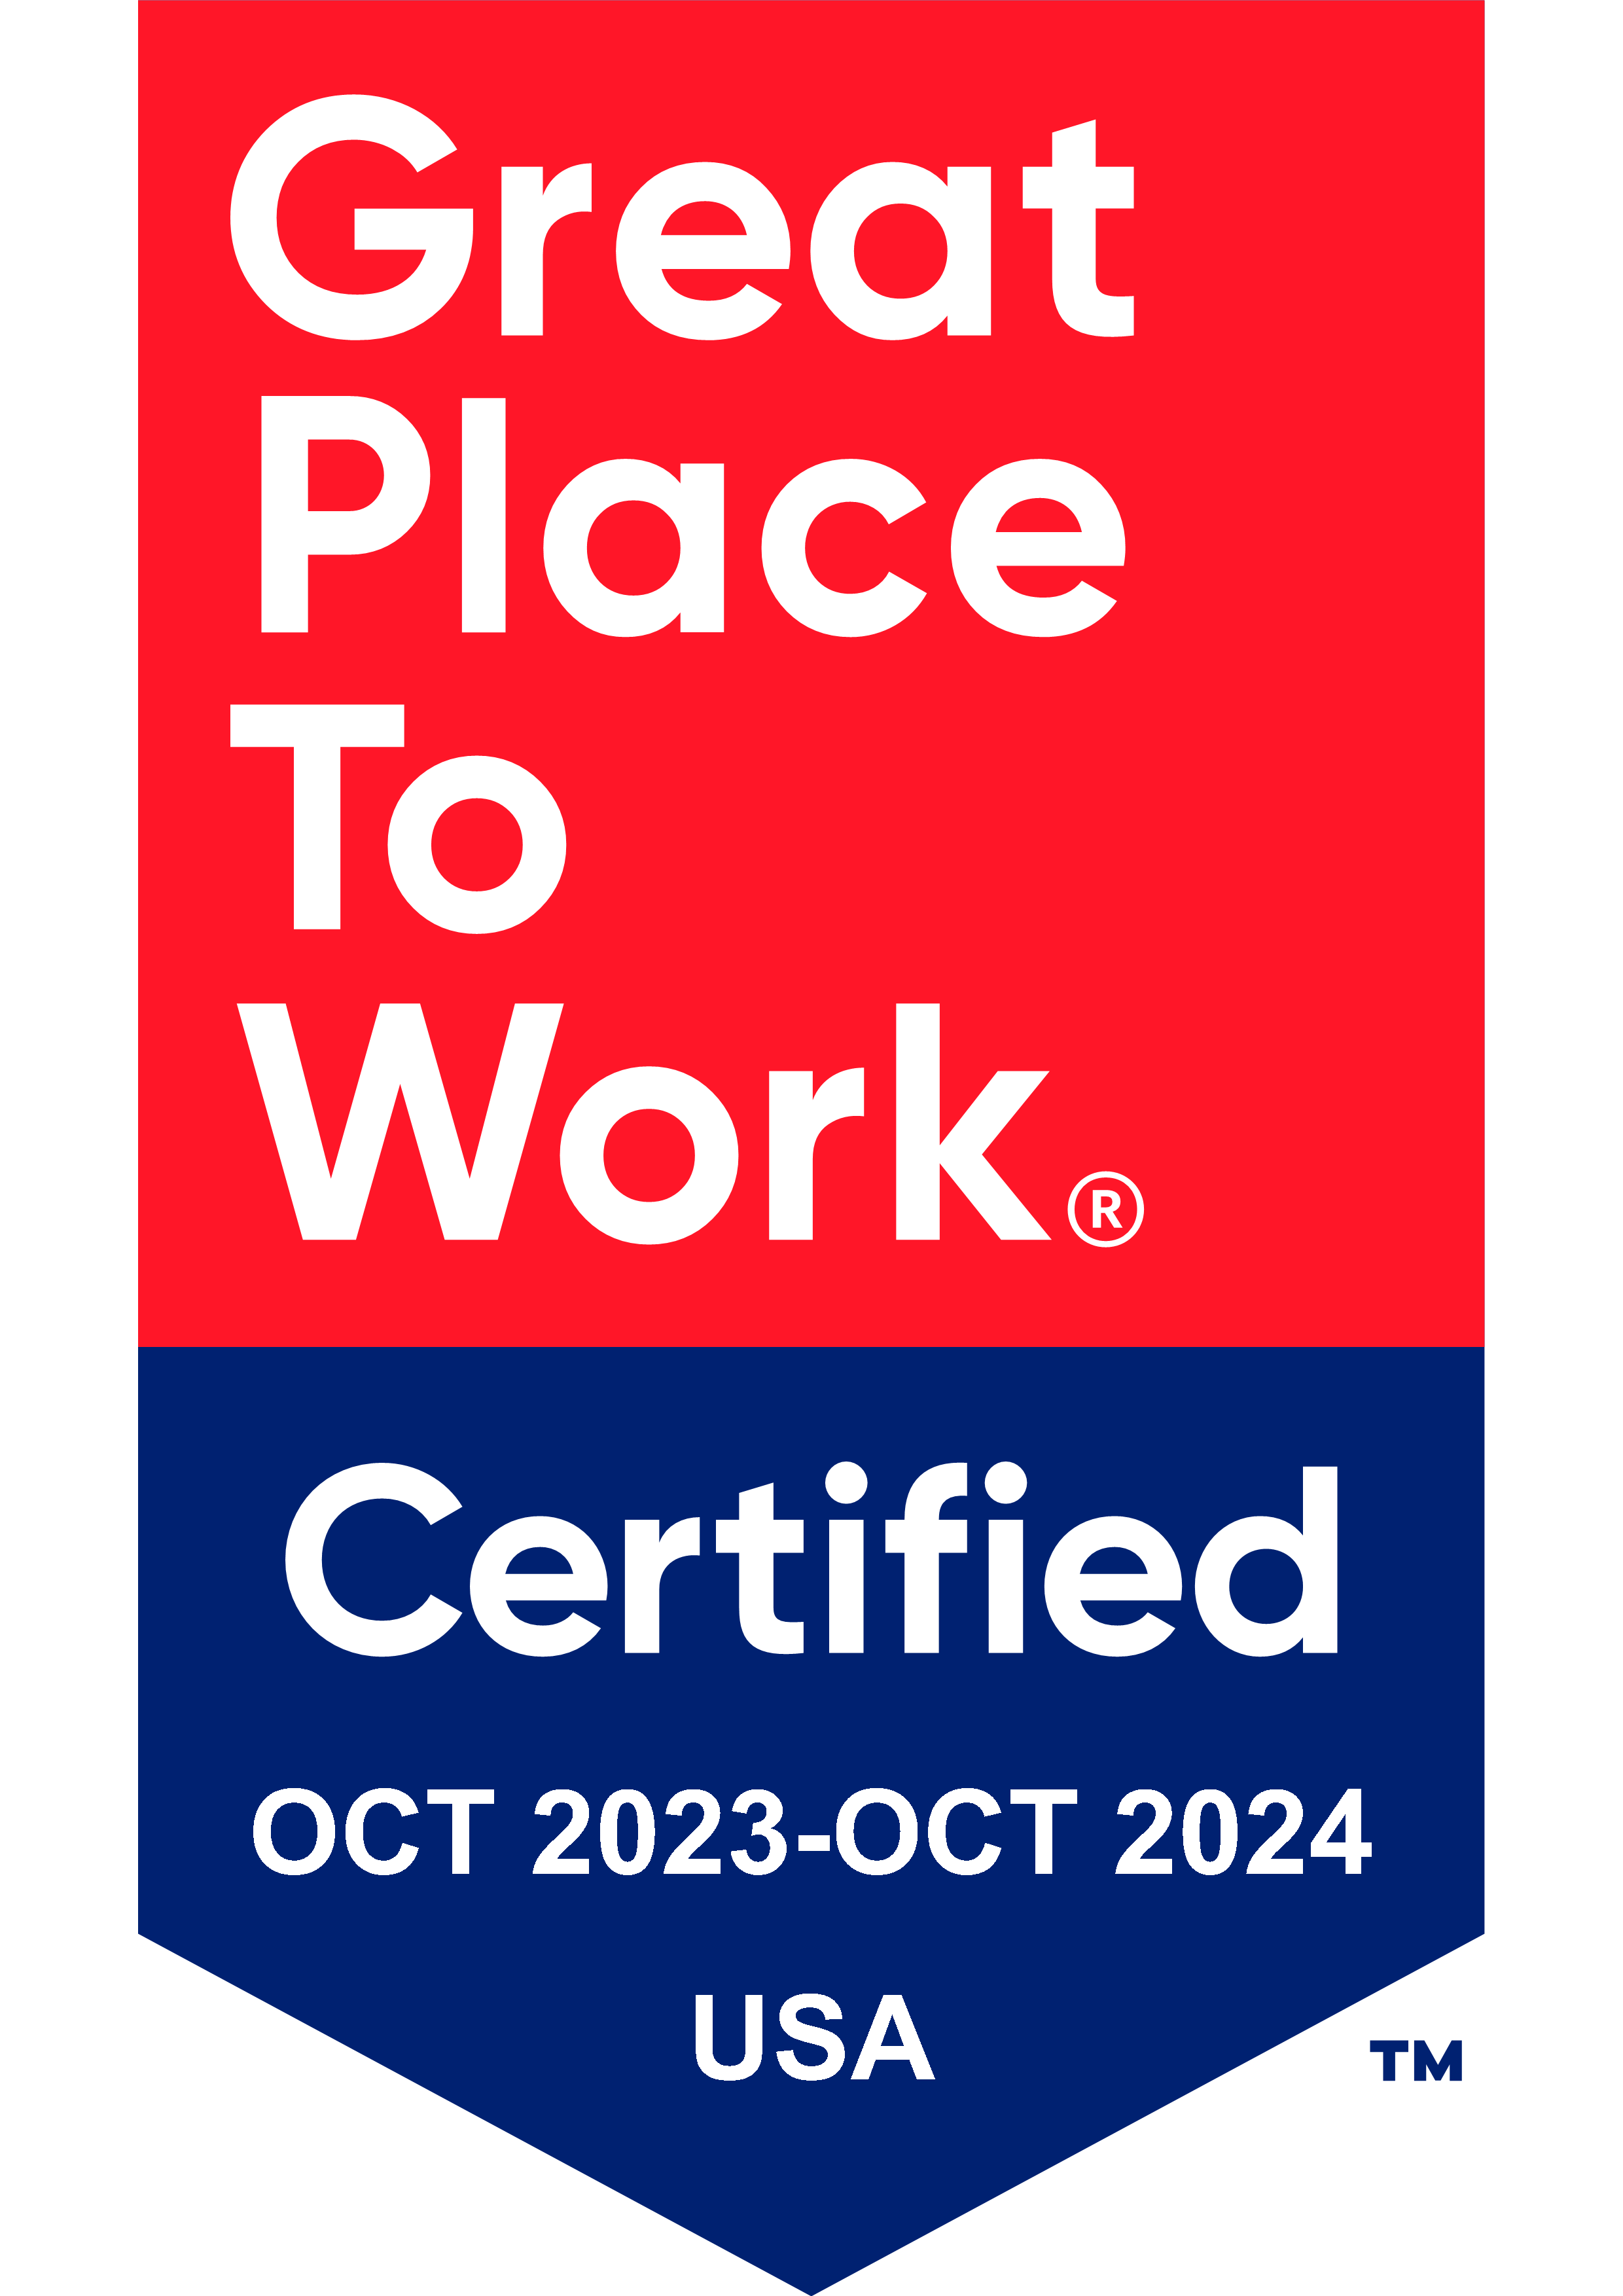 2023-2024 Great Place to Work Certification Badge